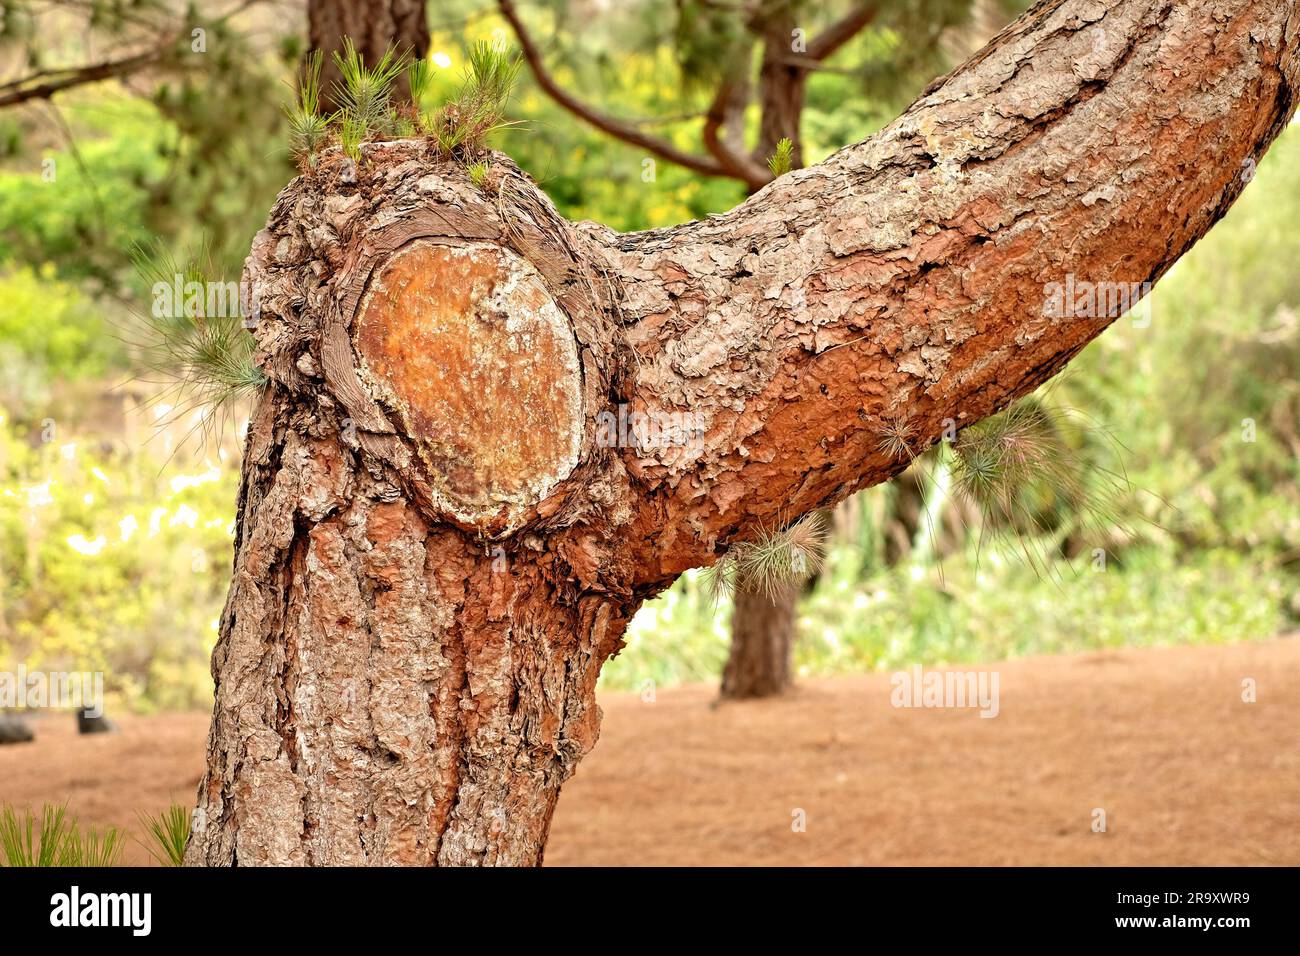 Black pine tree section with bark and a large wood knot covered in natural resin, large section showing the surroundings. Stock Photo